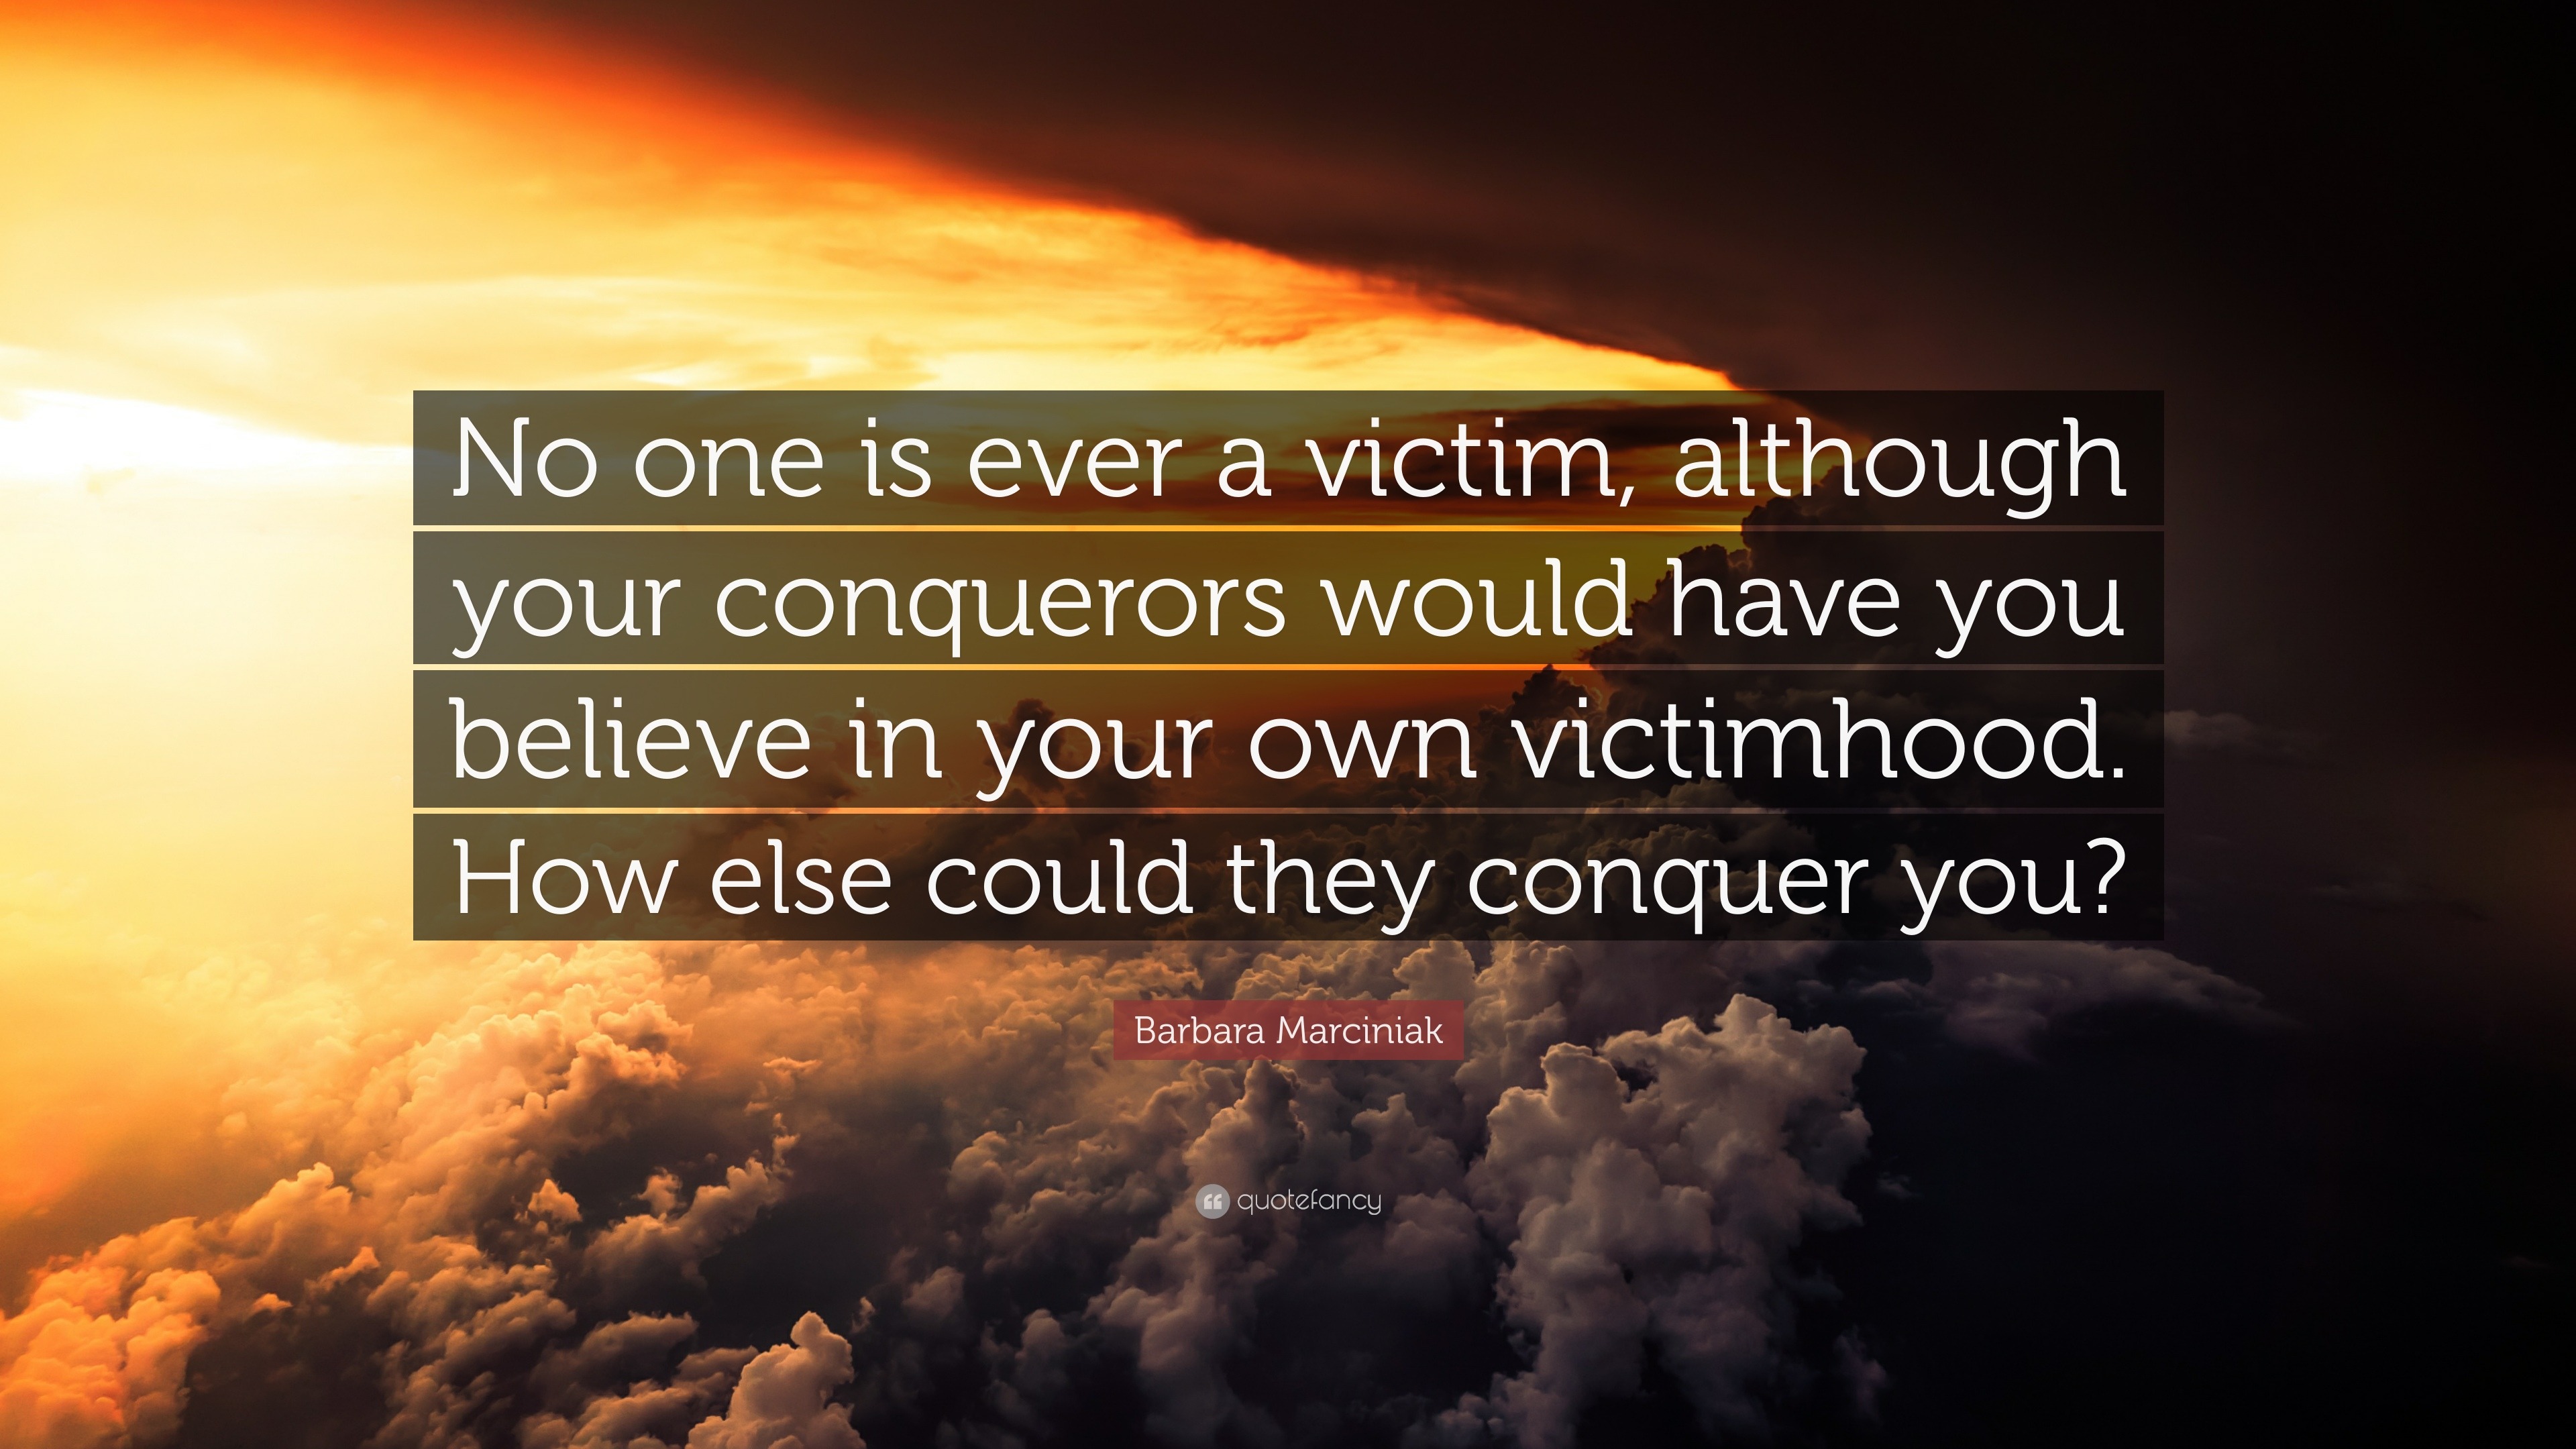 Barbara Marciniak Quote: “No one is ever a victim, although your